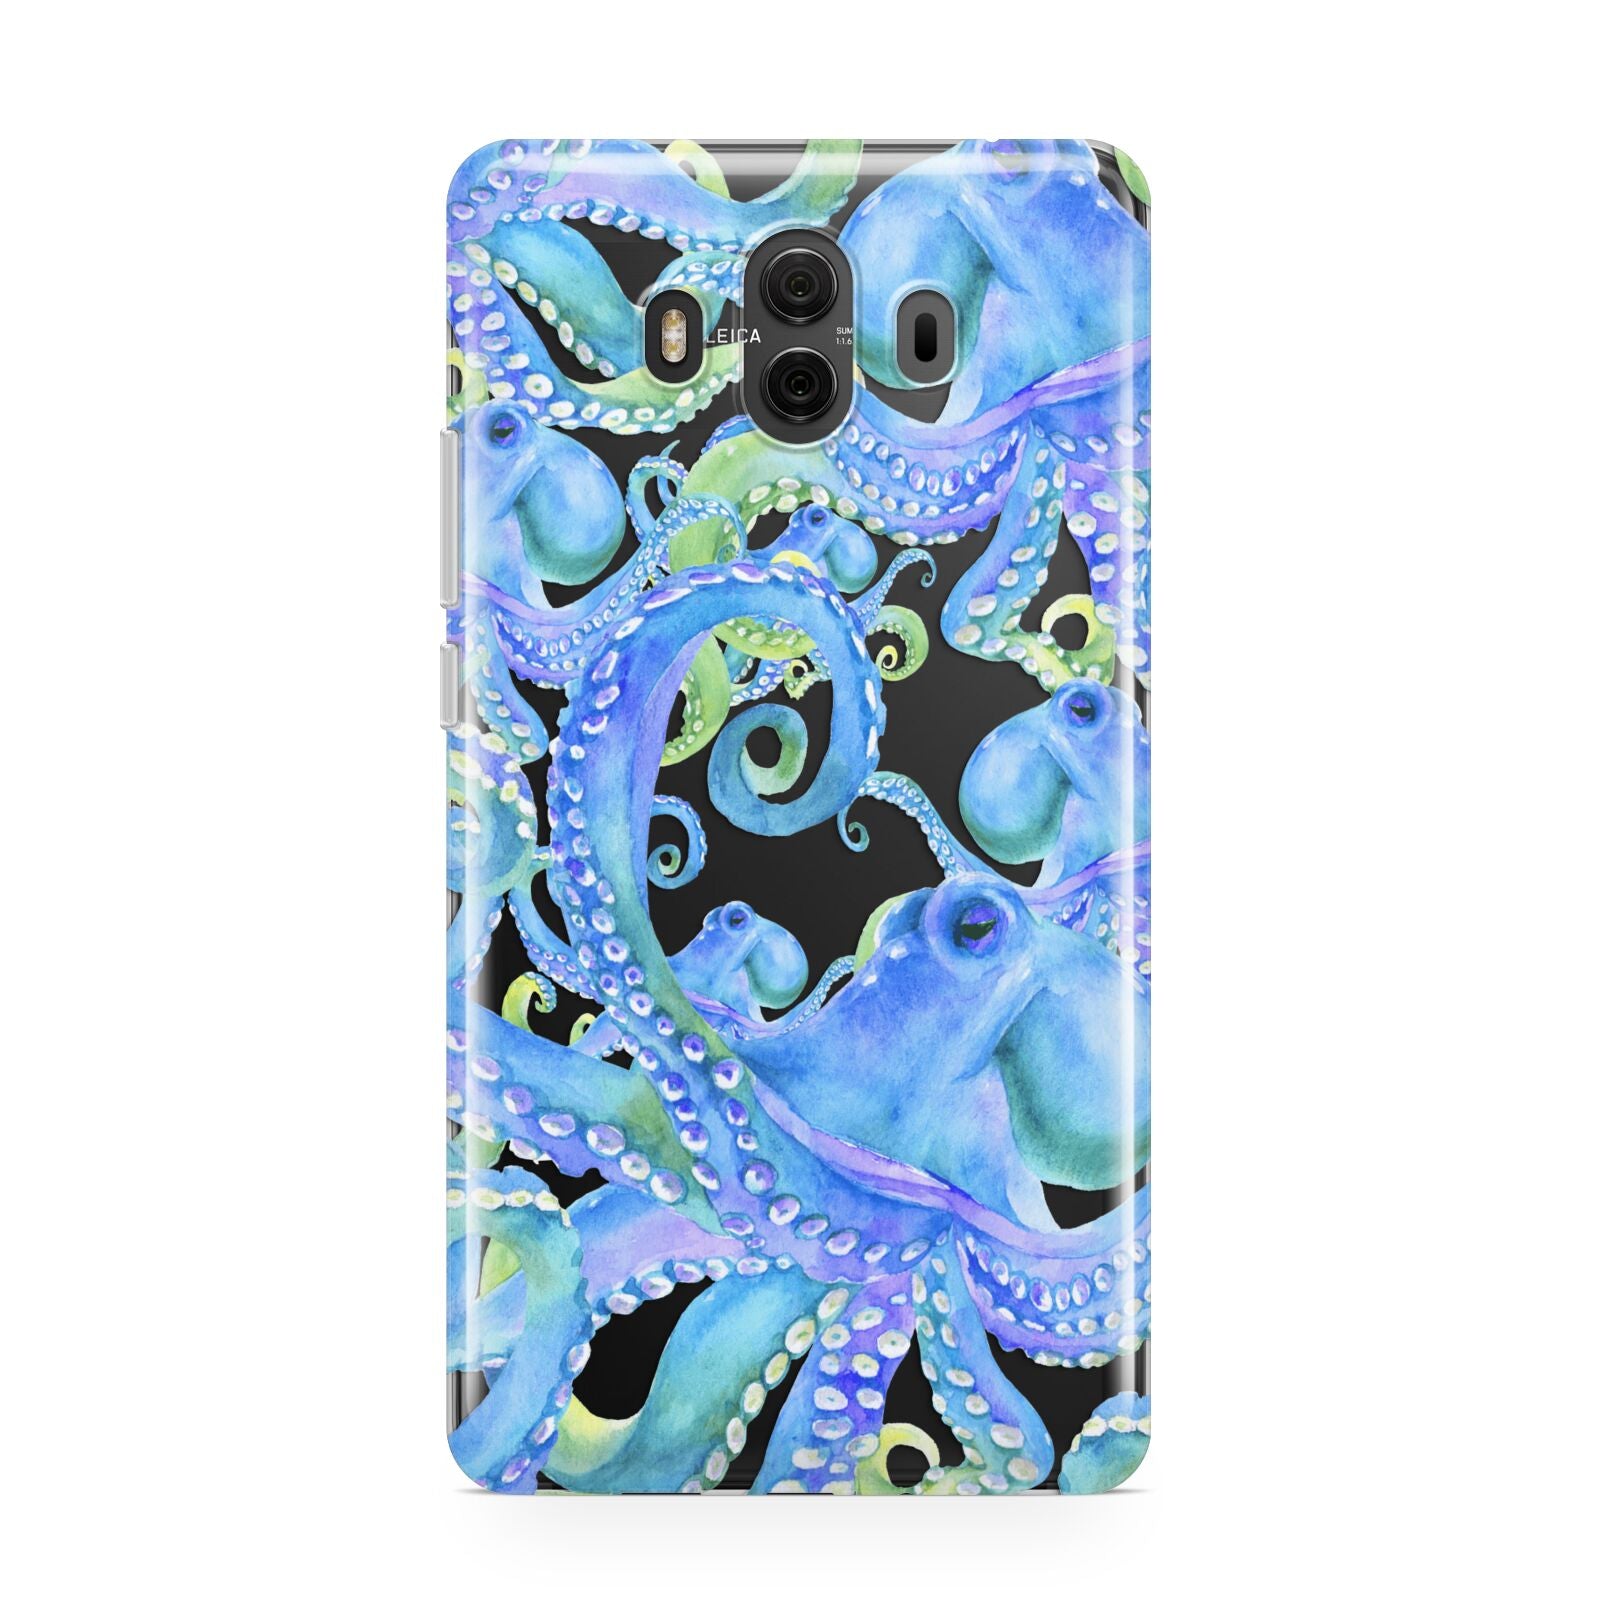 Octopus Huawei Mate 10 Protective Phone Case